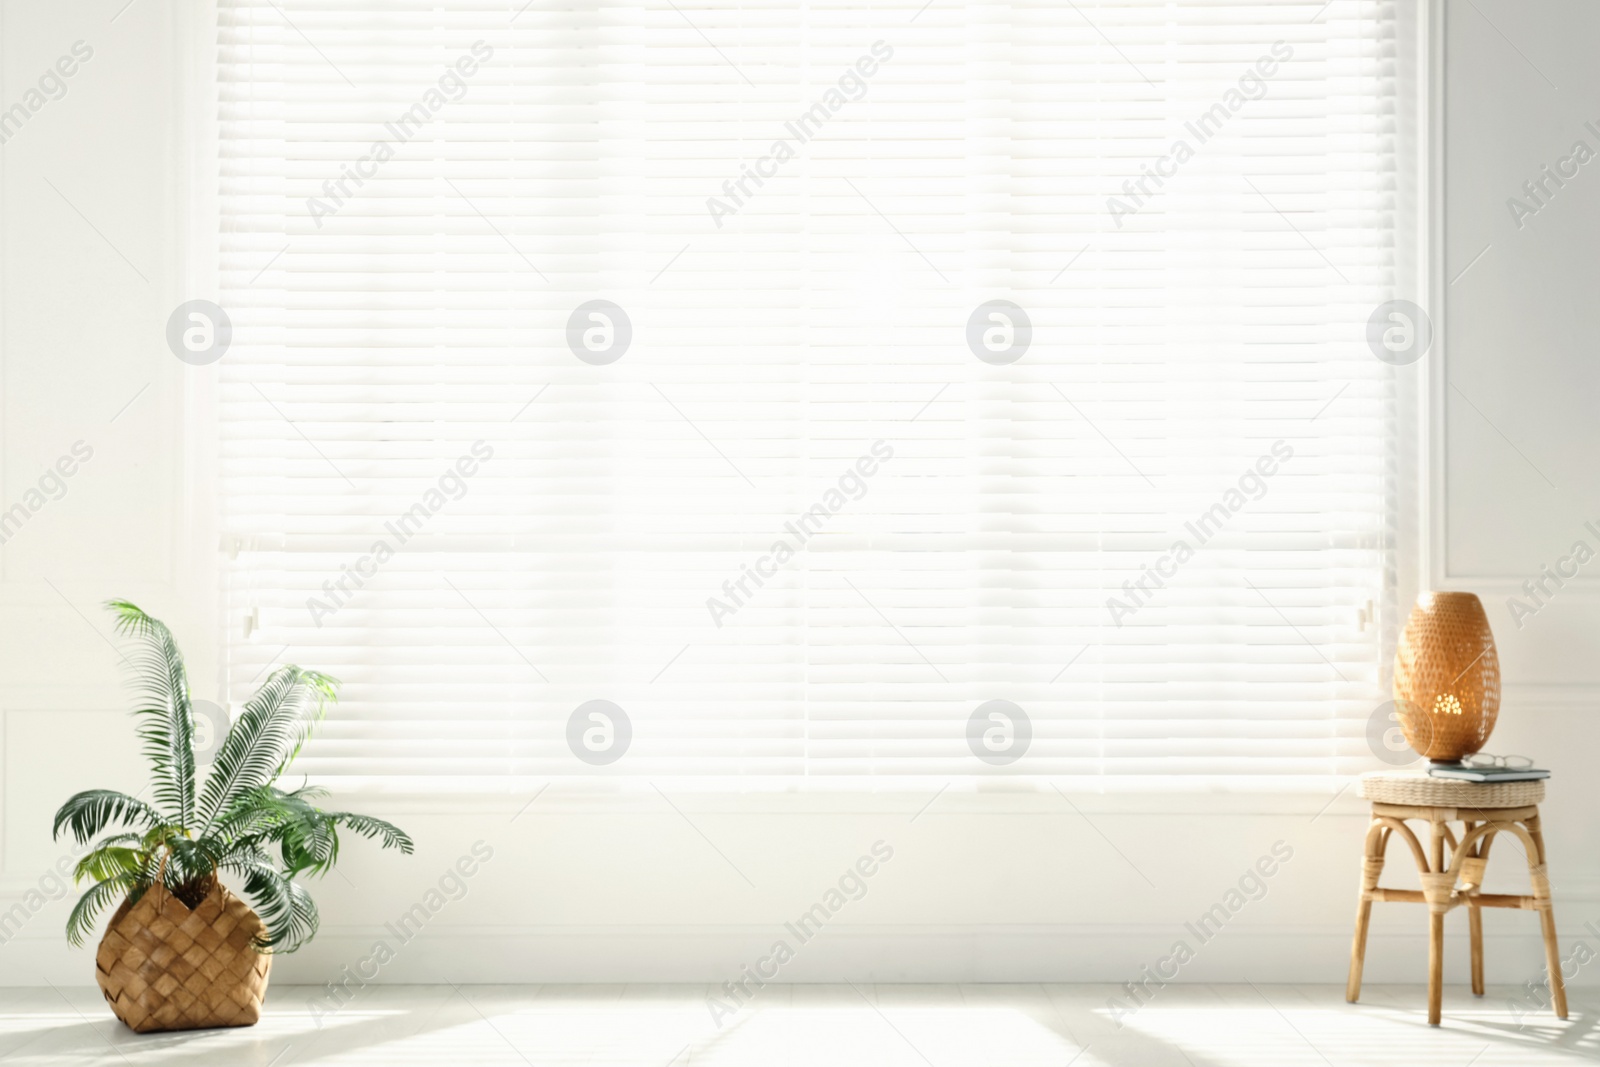 Photo of Stool, lamp and plant near big window in spacious room. Interior design